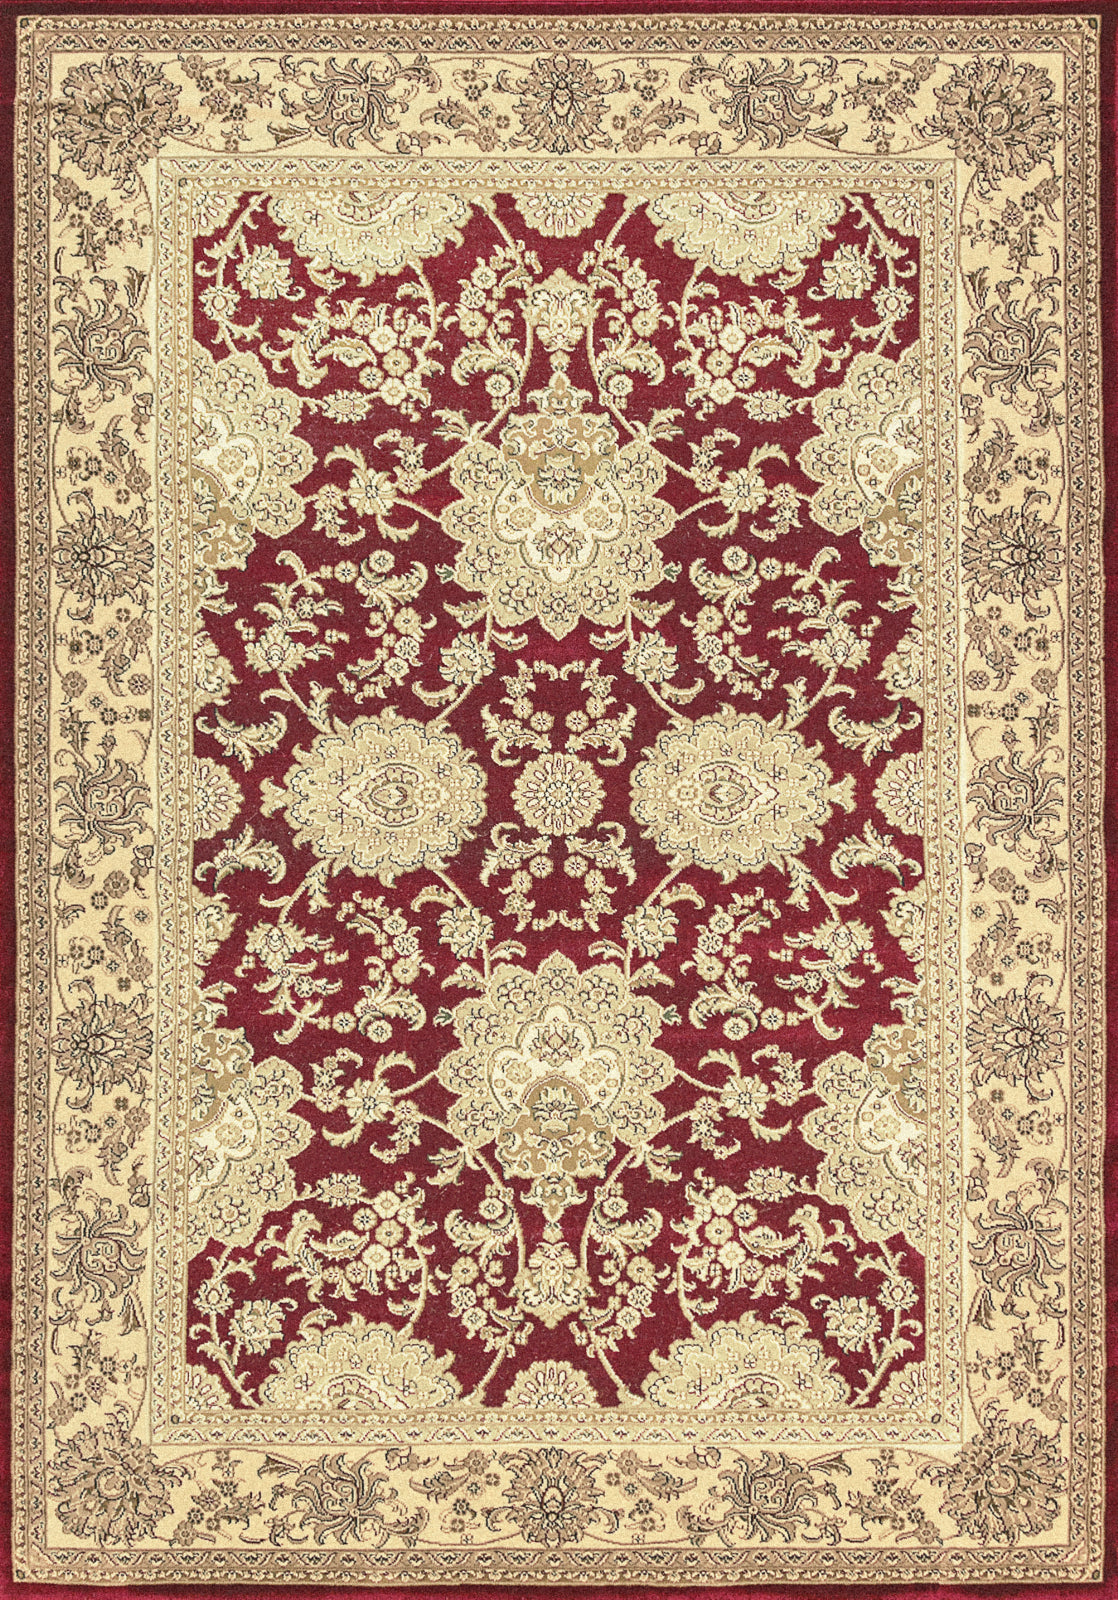 Dynamic Rugs Legacy 58019 Red Area Rug Main Image 